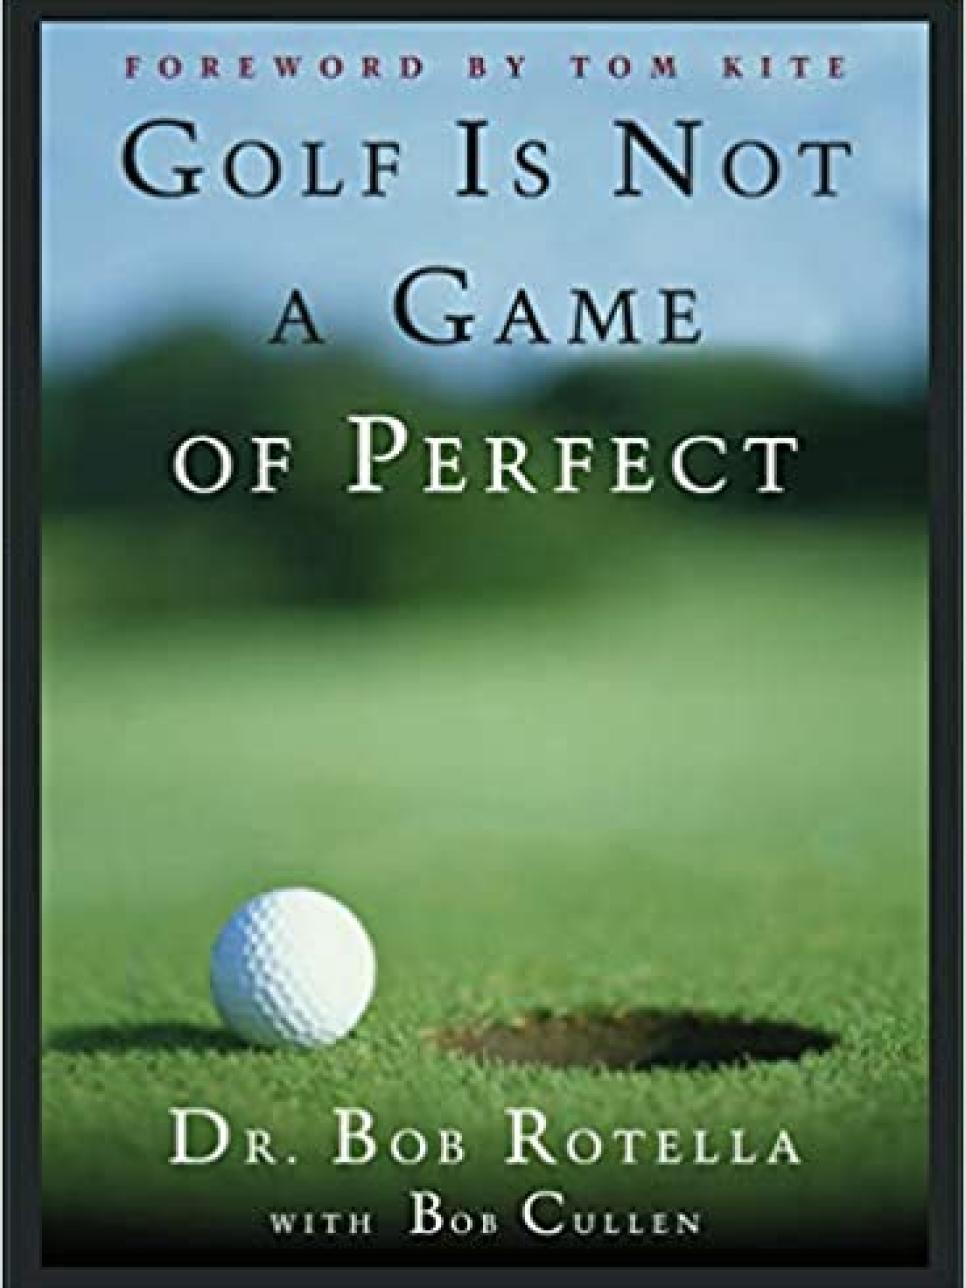 rx-amazongolf-is-not-a-game-of-perfect-by-bob-rotella-with-bob-cullen-1995.jpeg